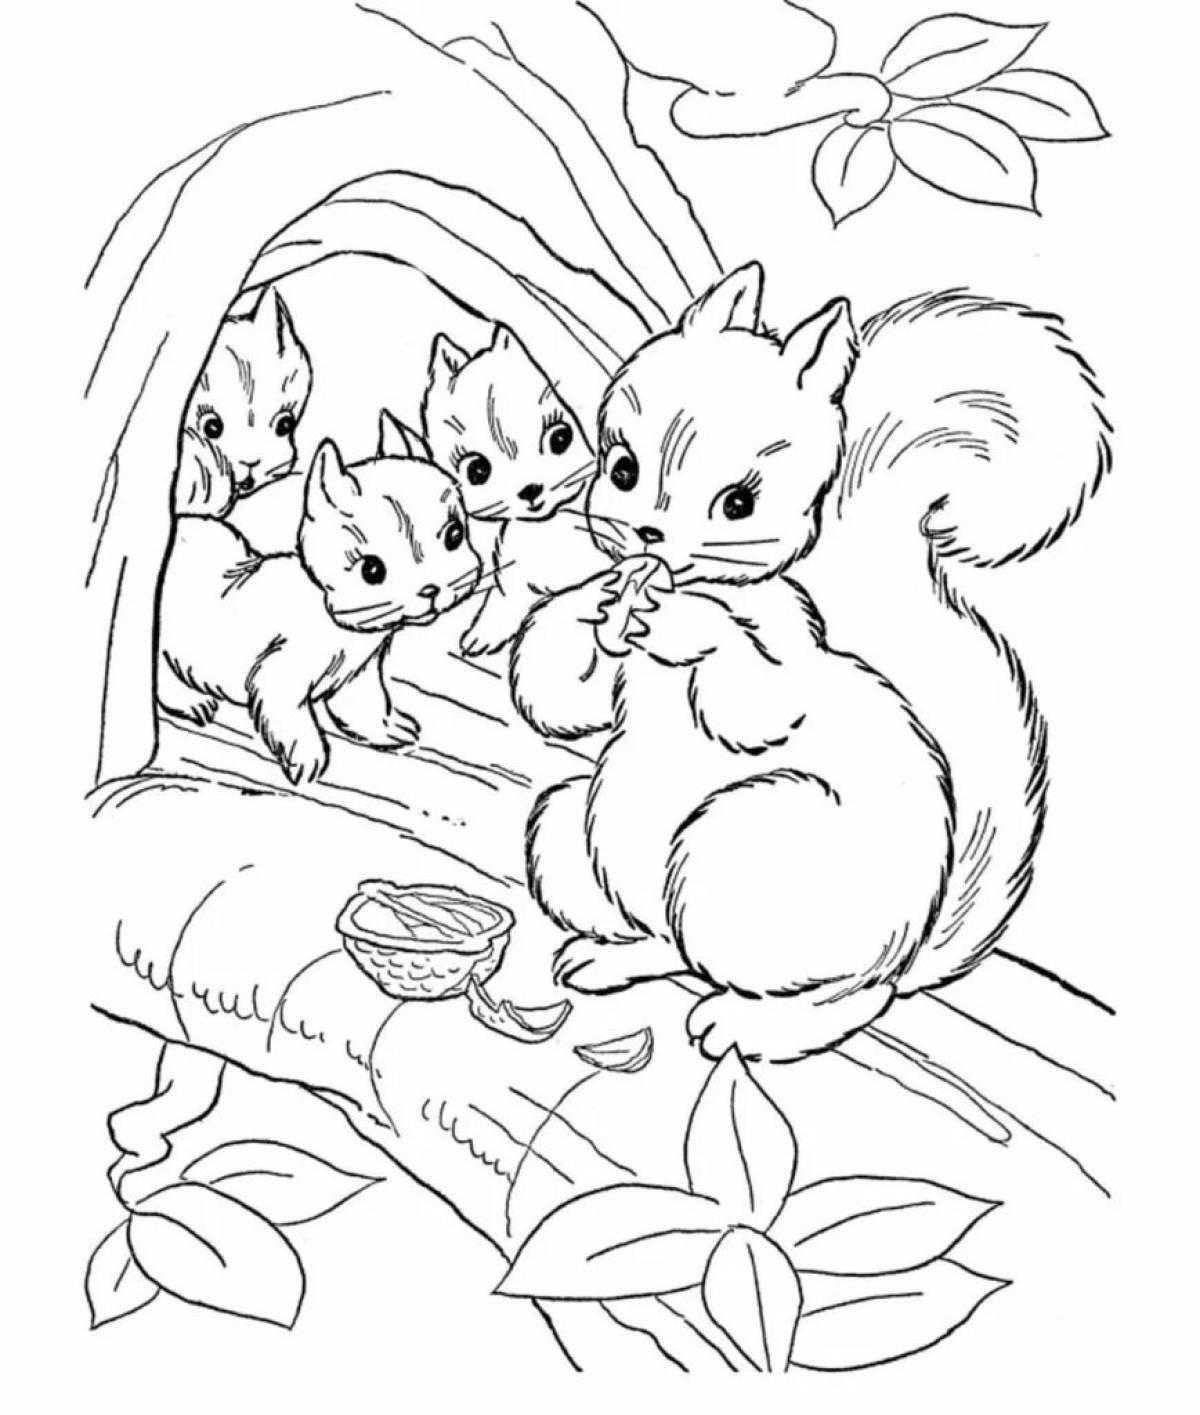 Humorous wild animal coloring book for kids